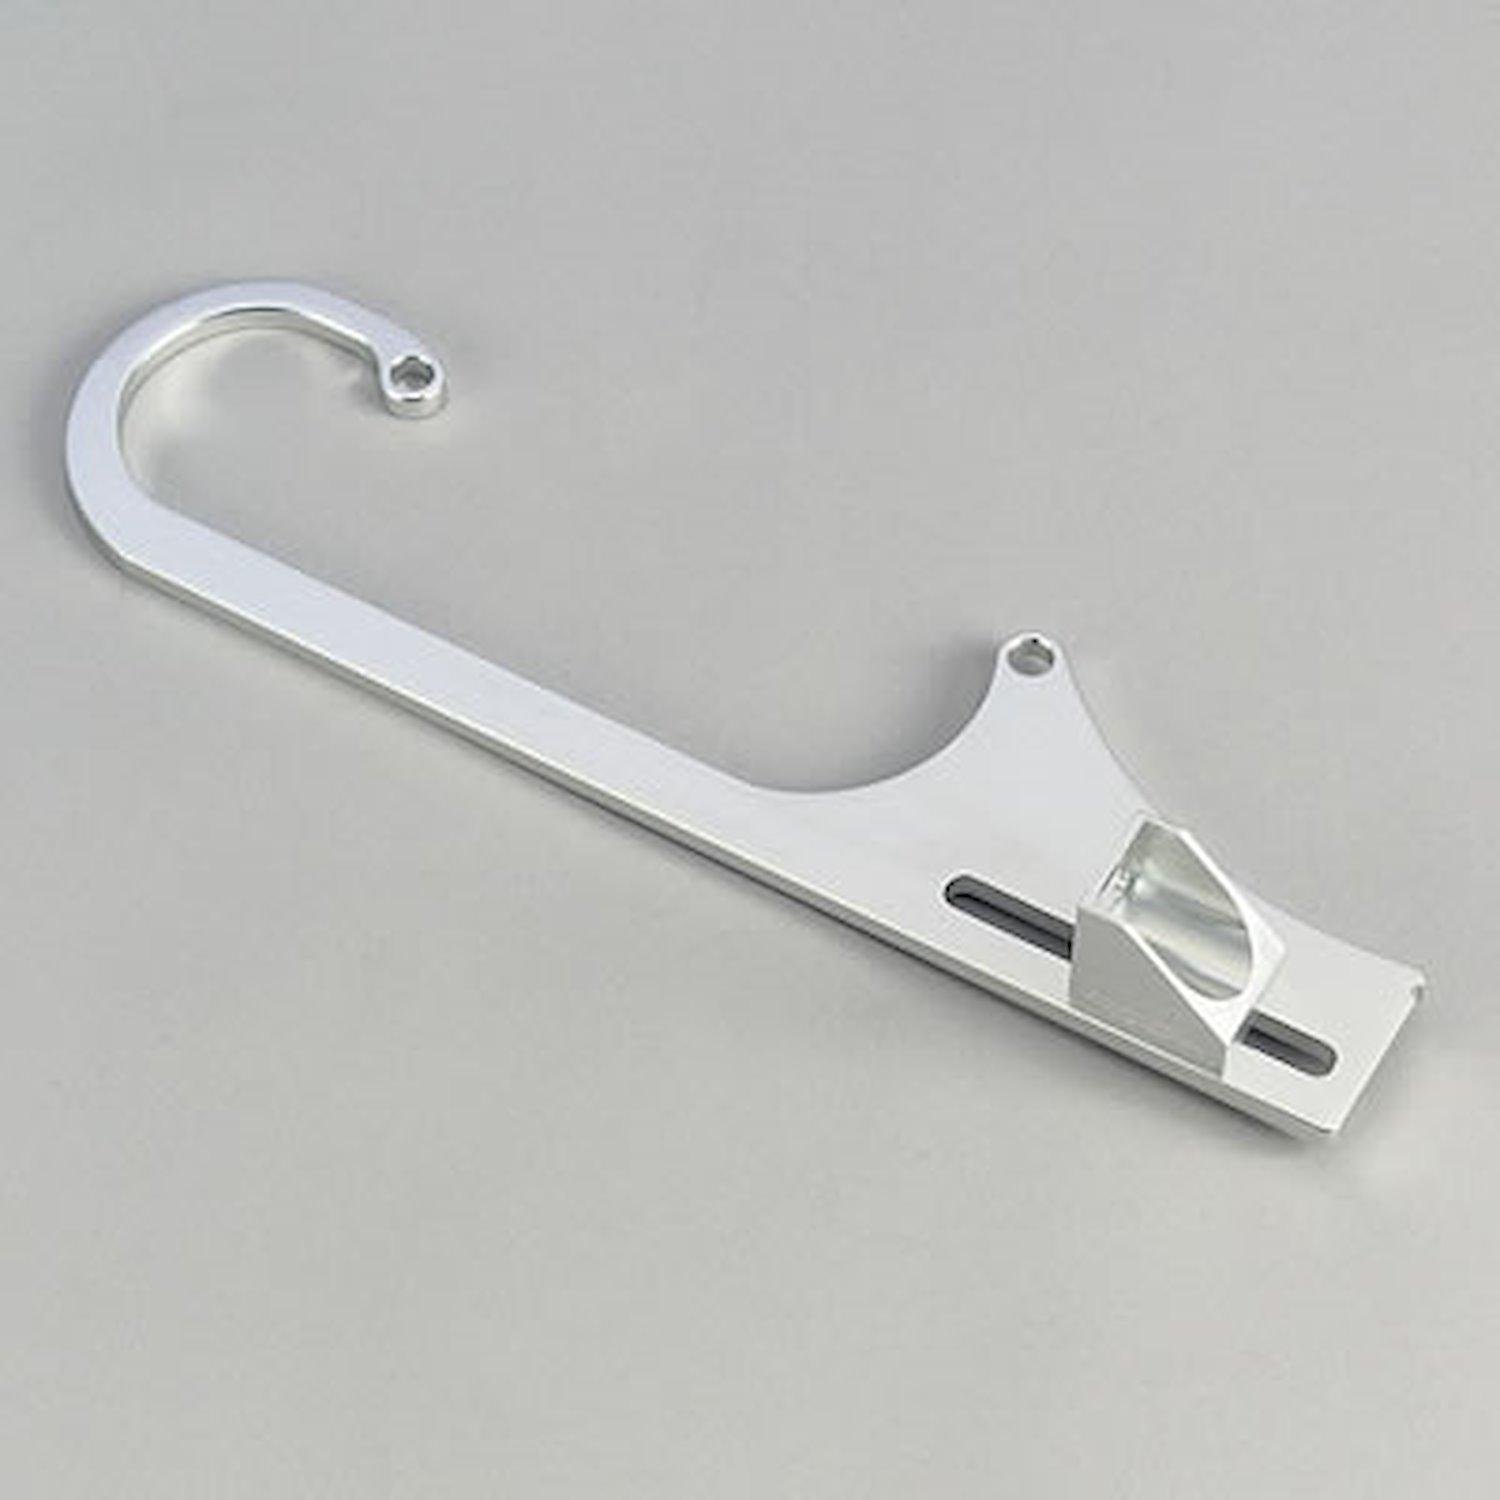 Adjustable Throttle Cable Bracket -Clear Fits 4150/3310 Series Holley 750 with GM Snap in Cable